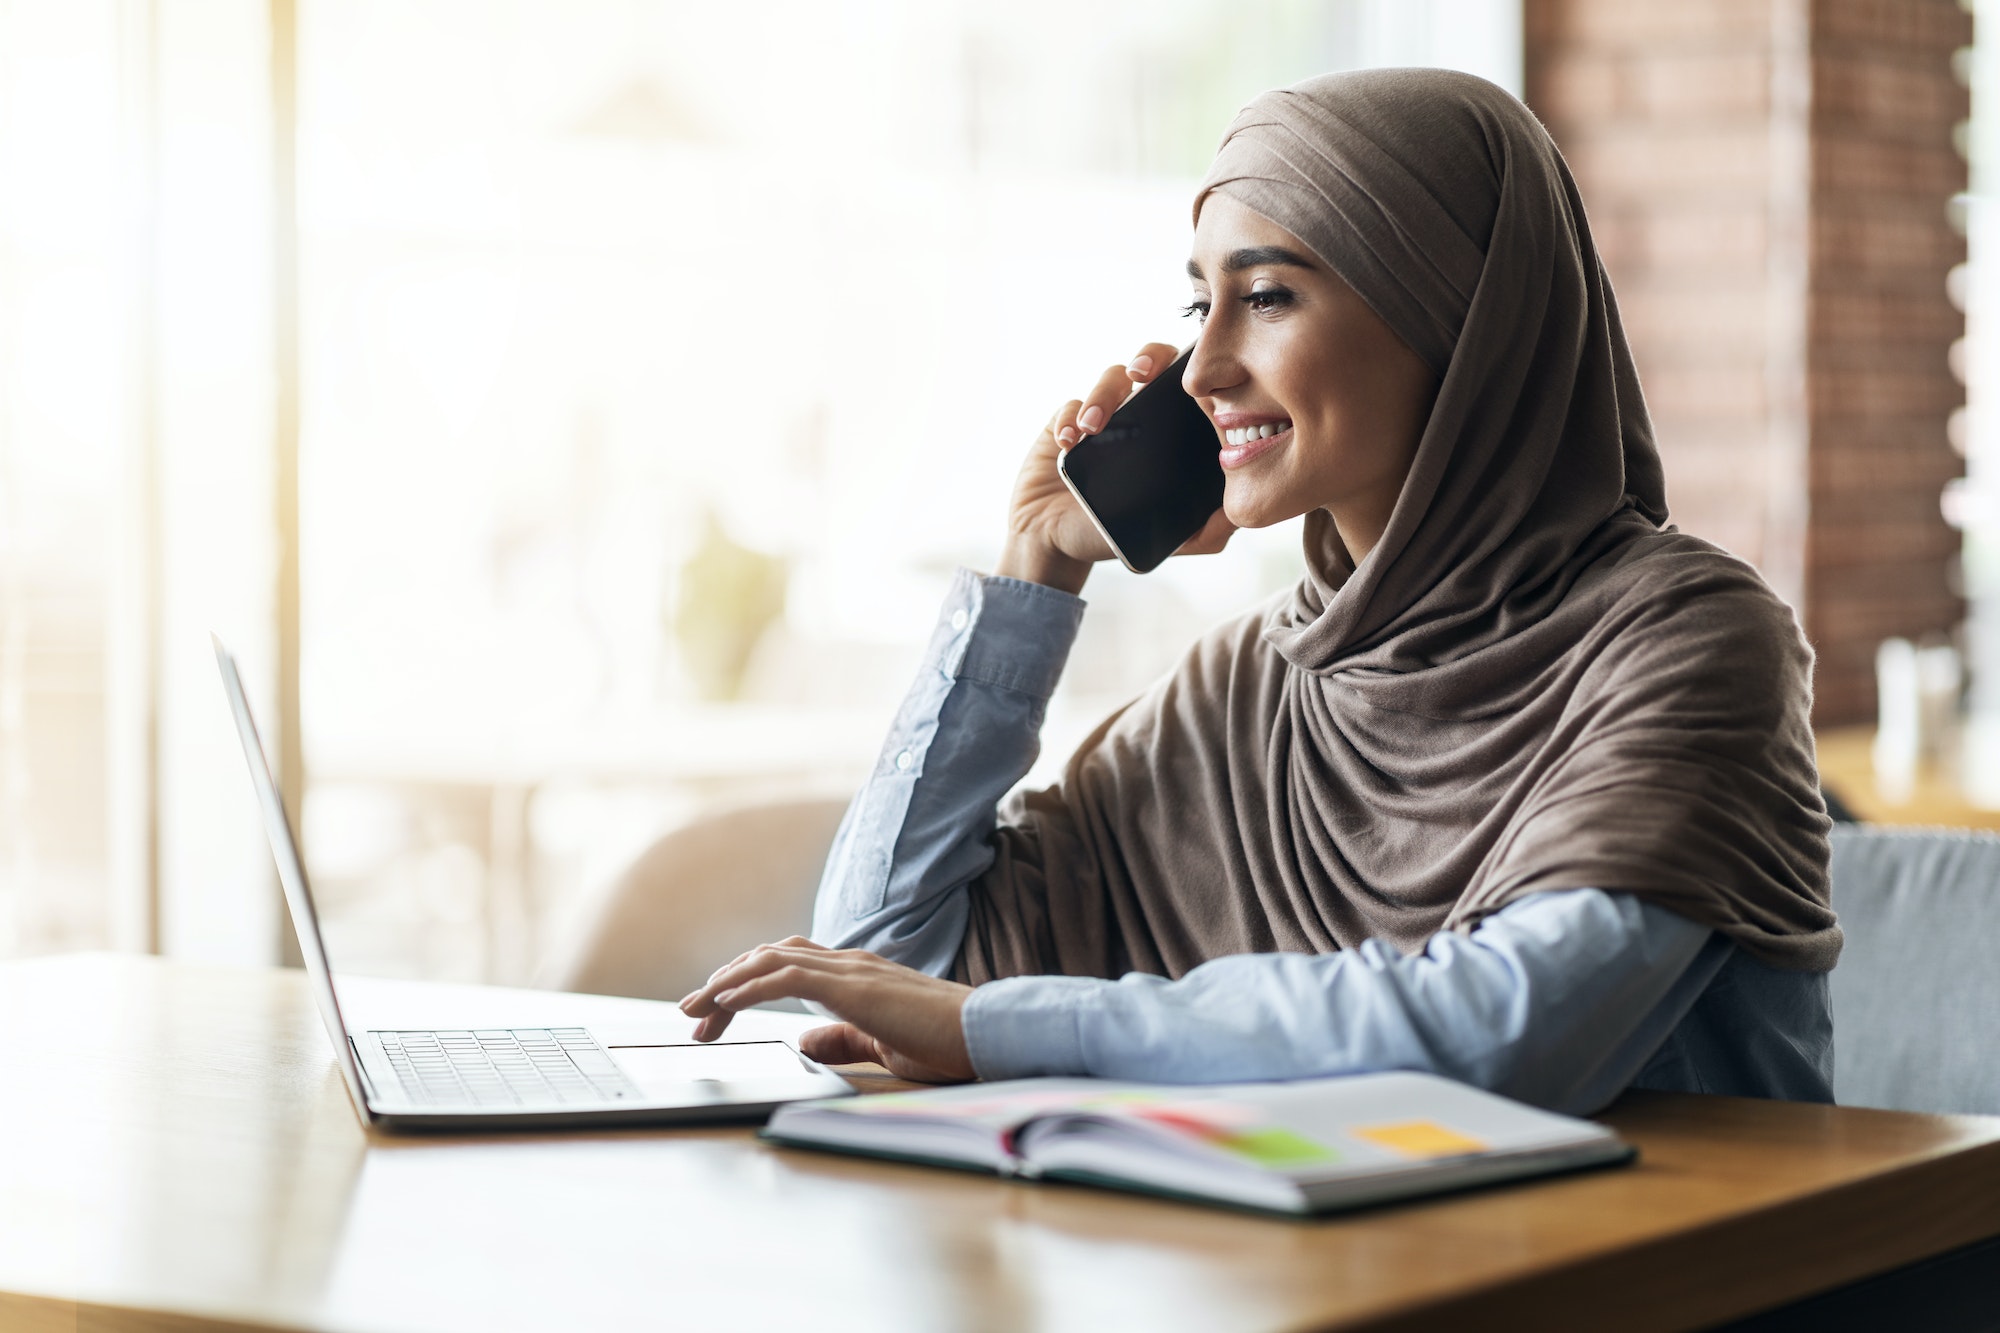 Girl in hijab looking for job online, talking on phone